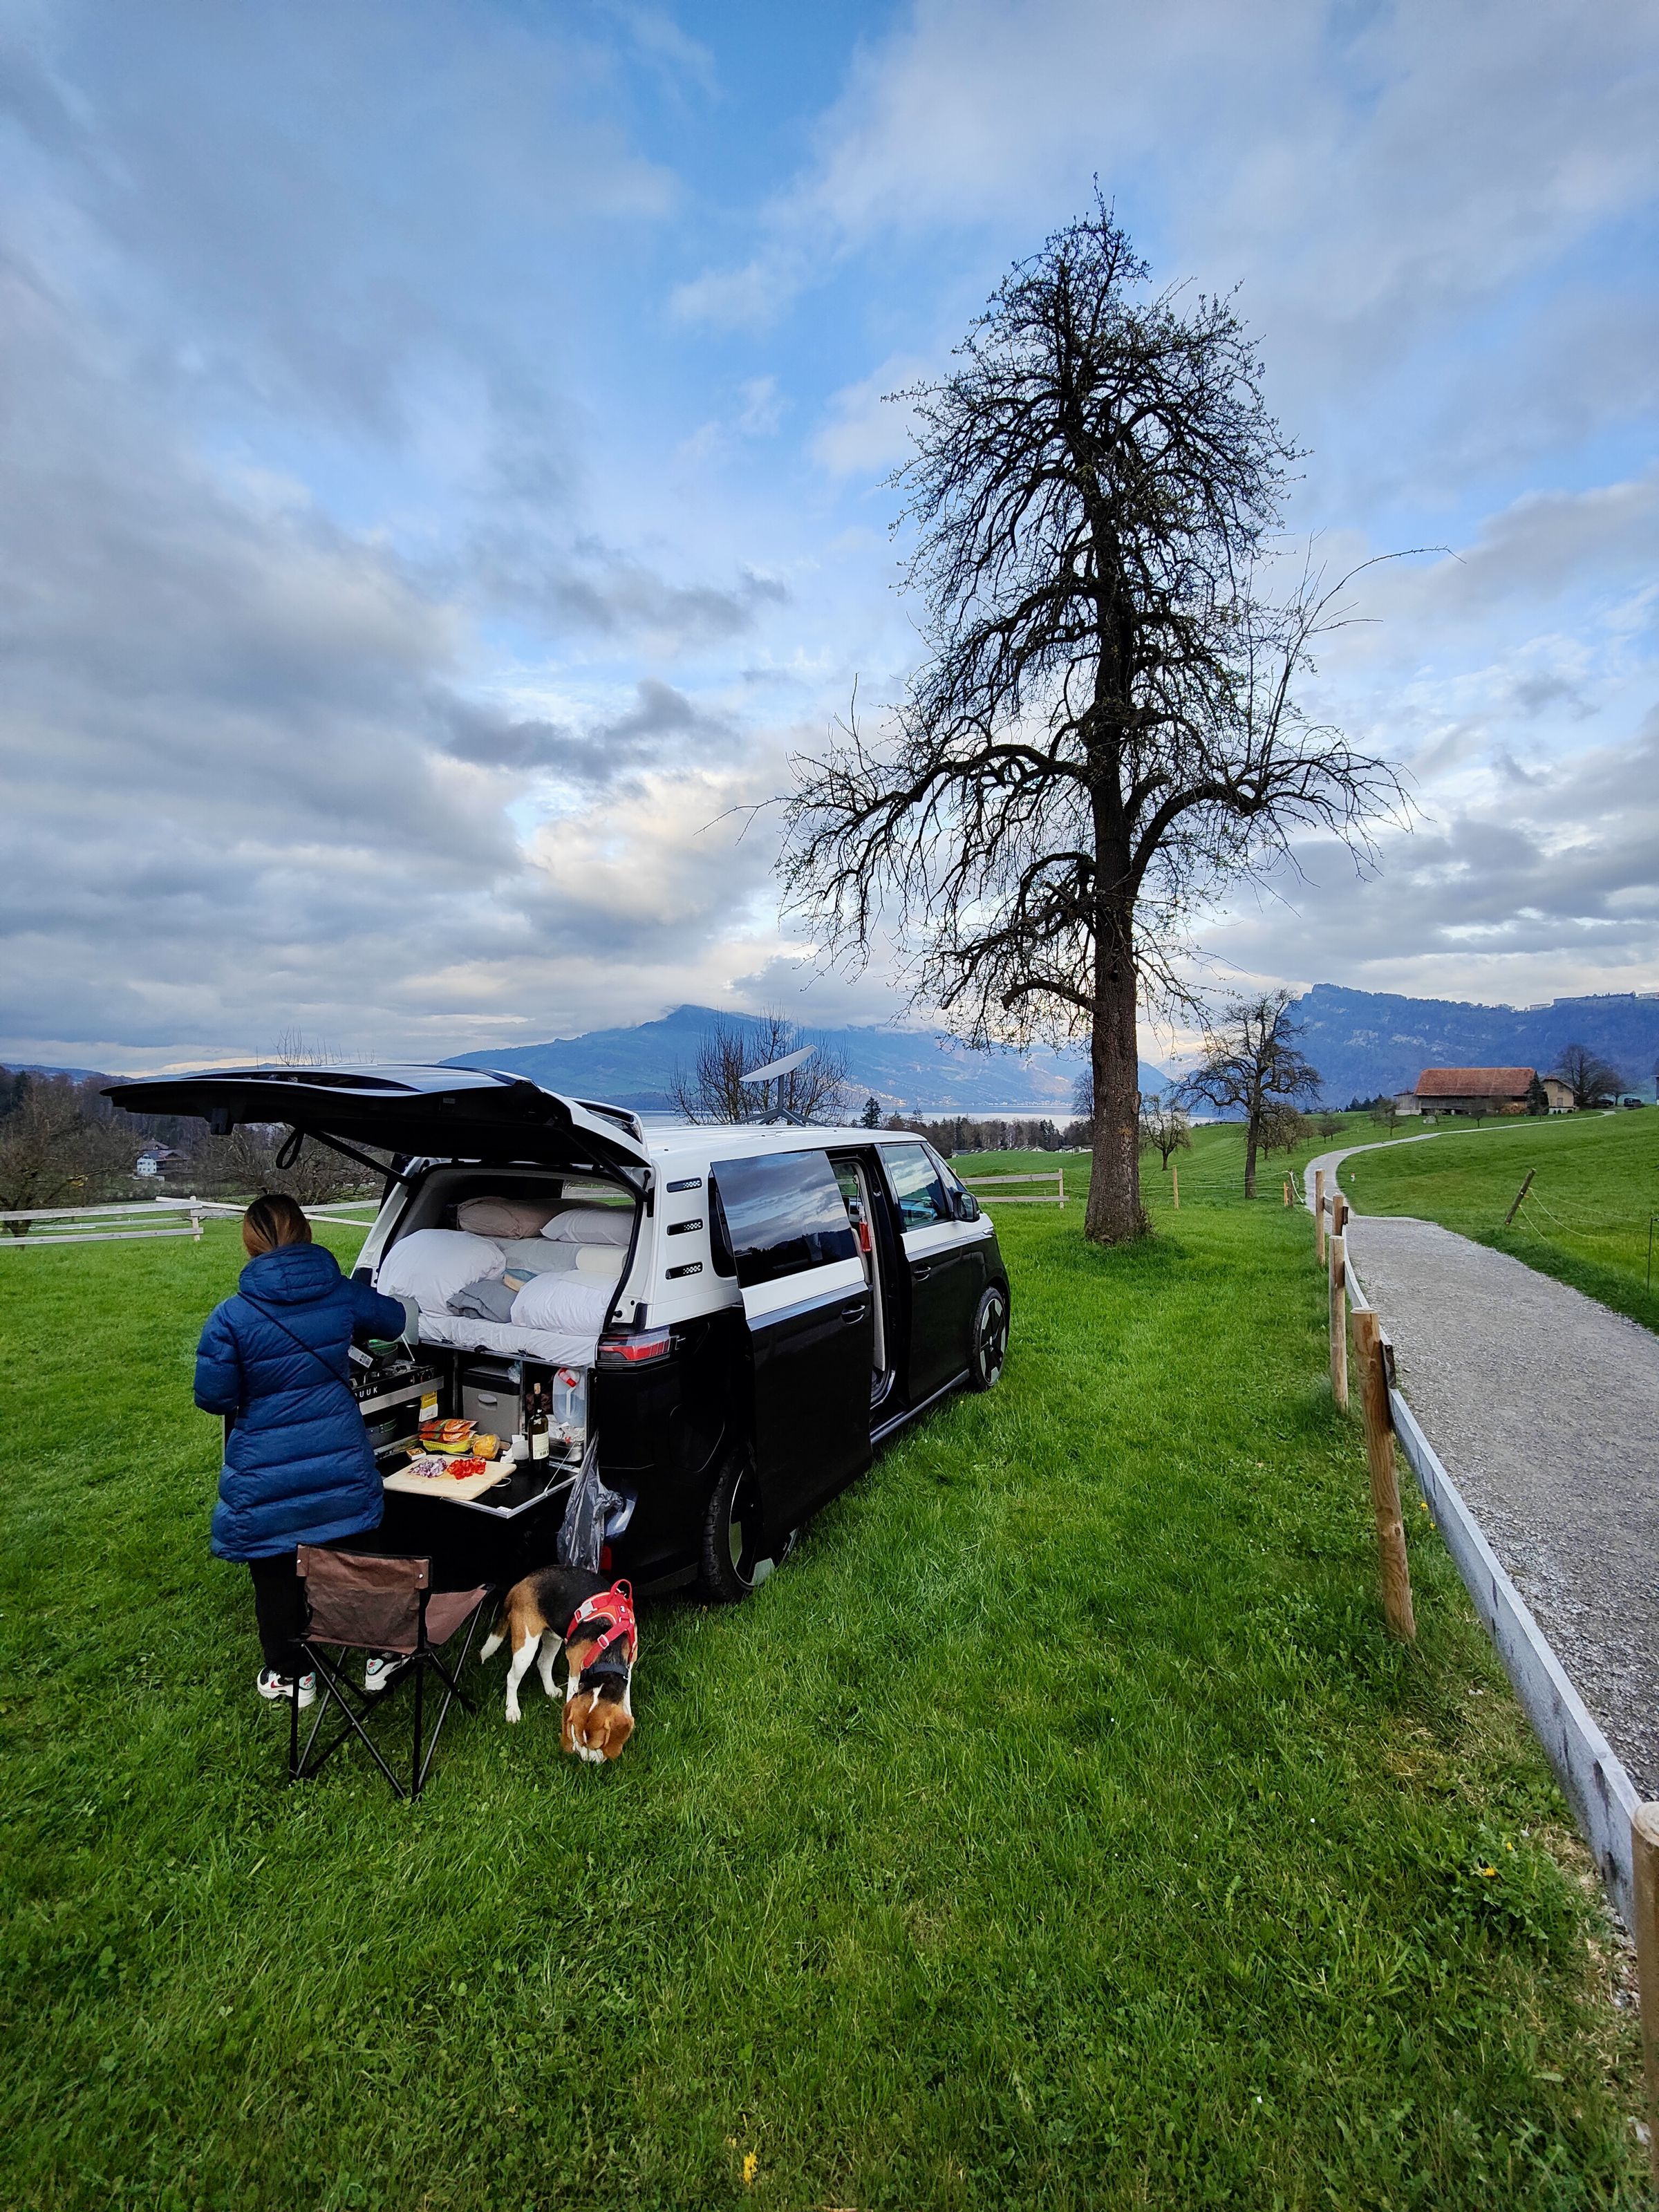 Paid a dairy farmer to camp on their property about 30 minutes outside of Lucerne, Switzerland.